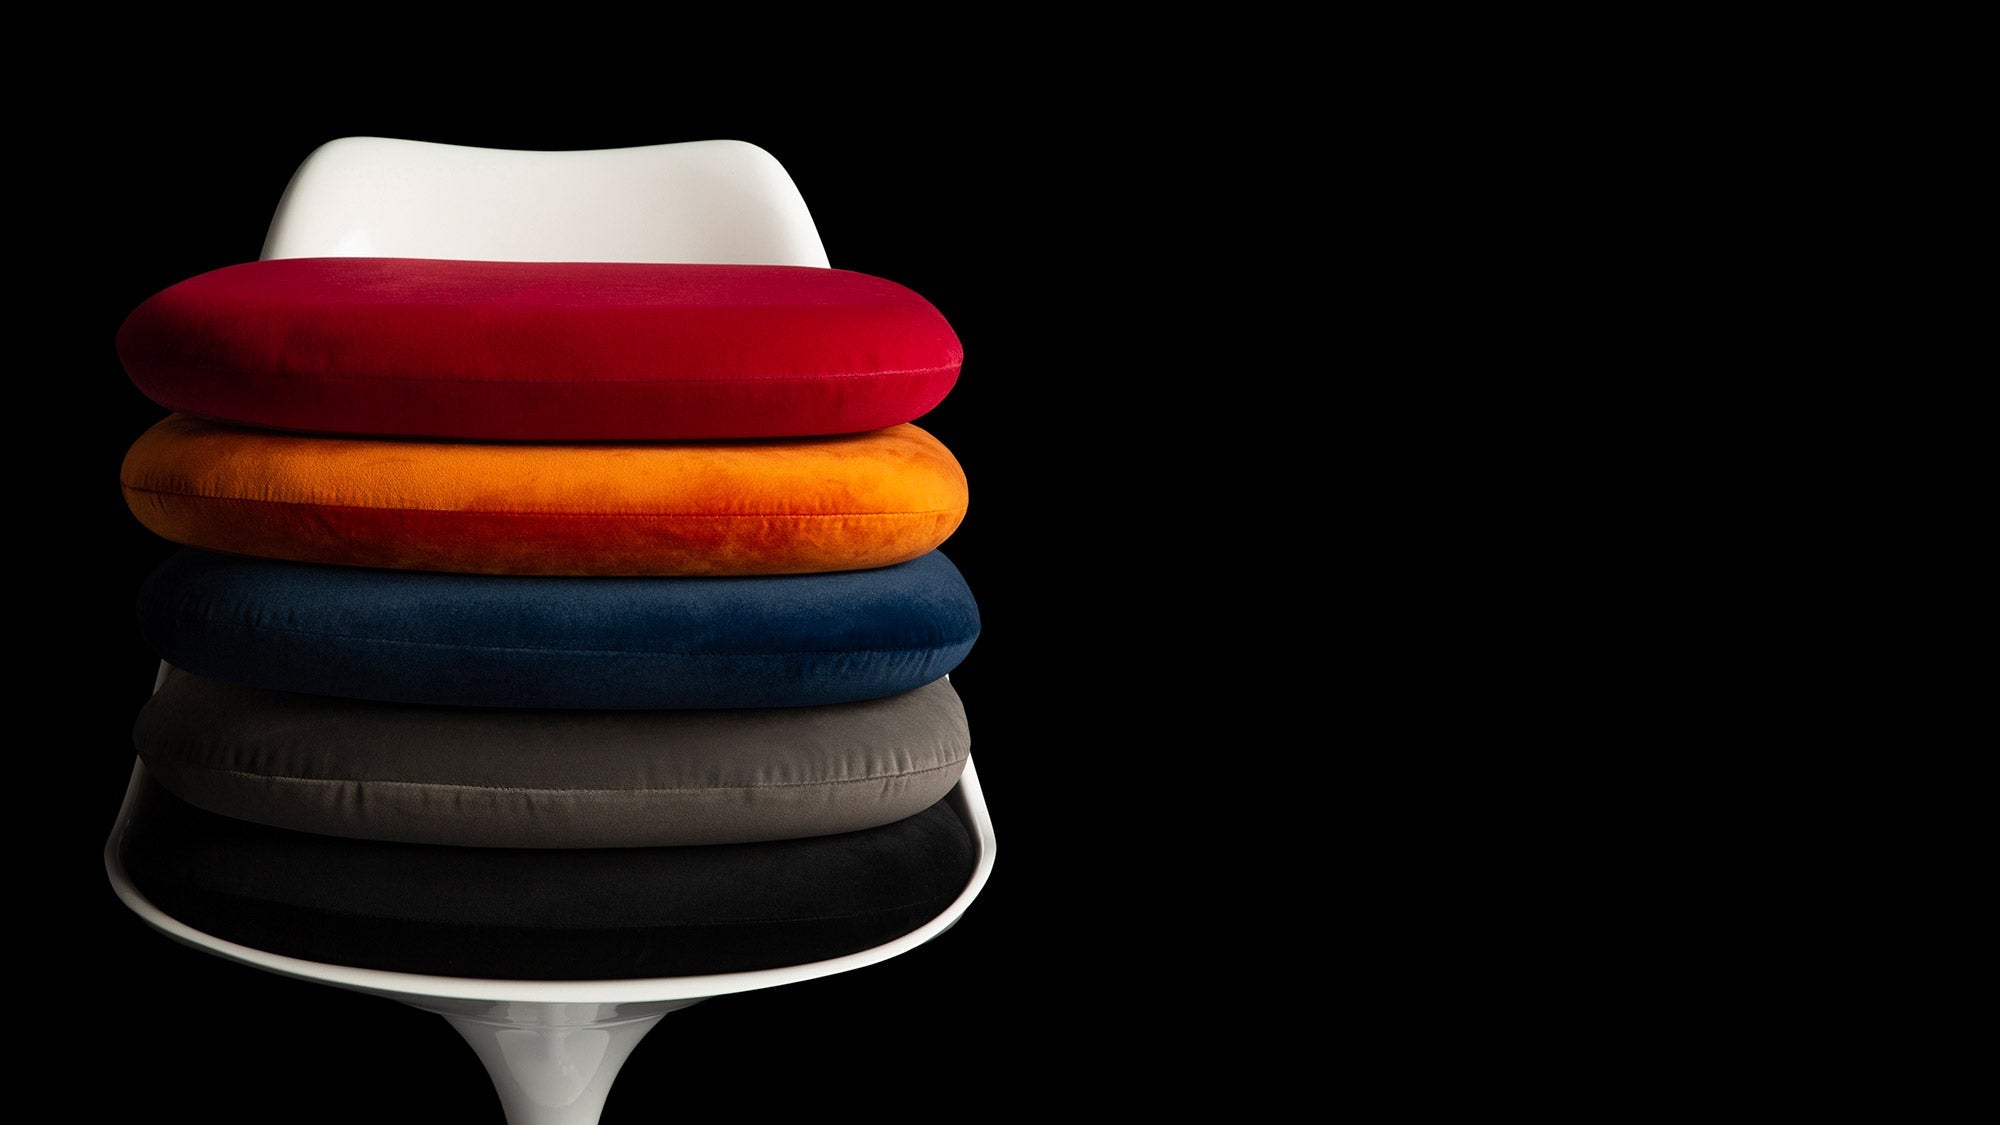 Against a black backdrop is a white Saarinen Tulip Chair face on with a stack of 5 cushion colours in red, black, blue, grey and orange